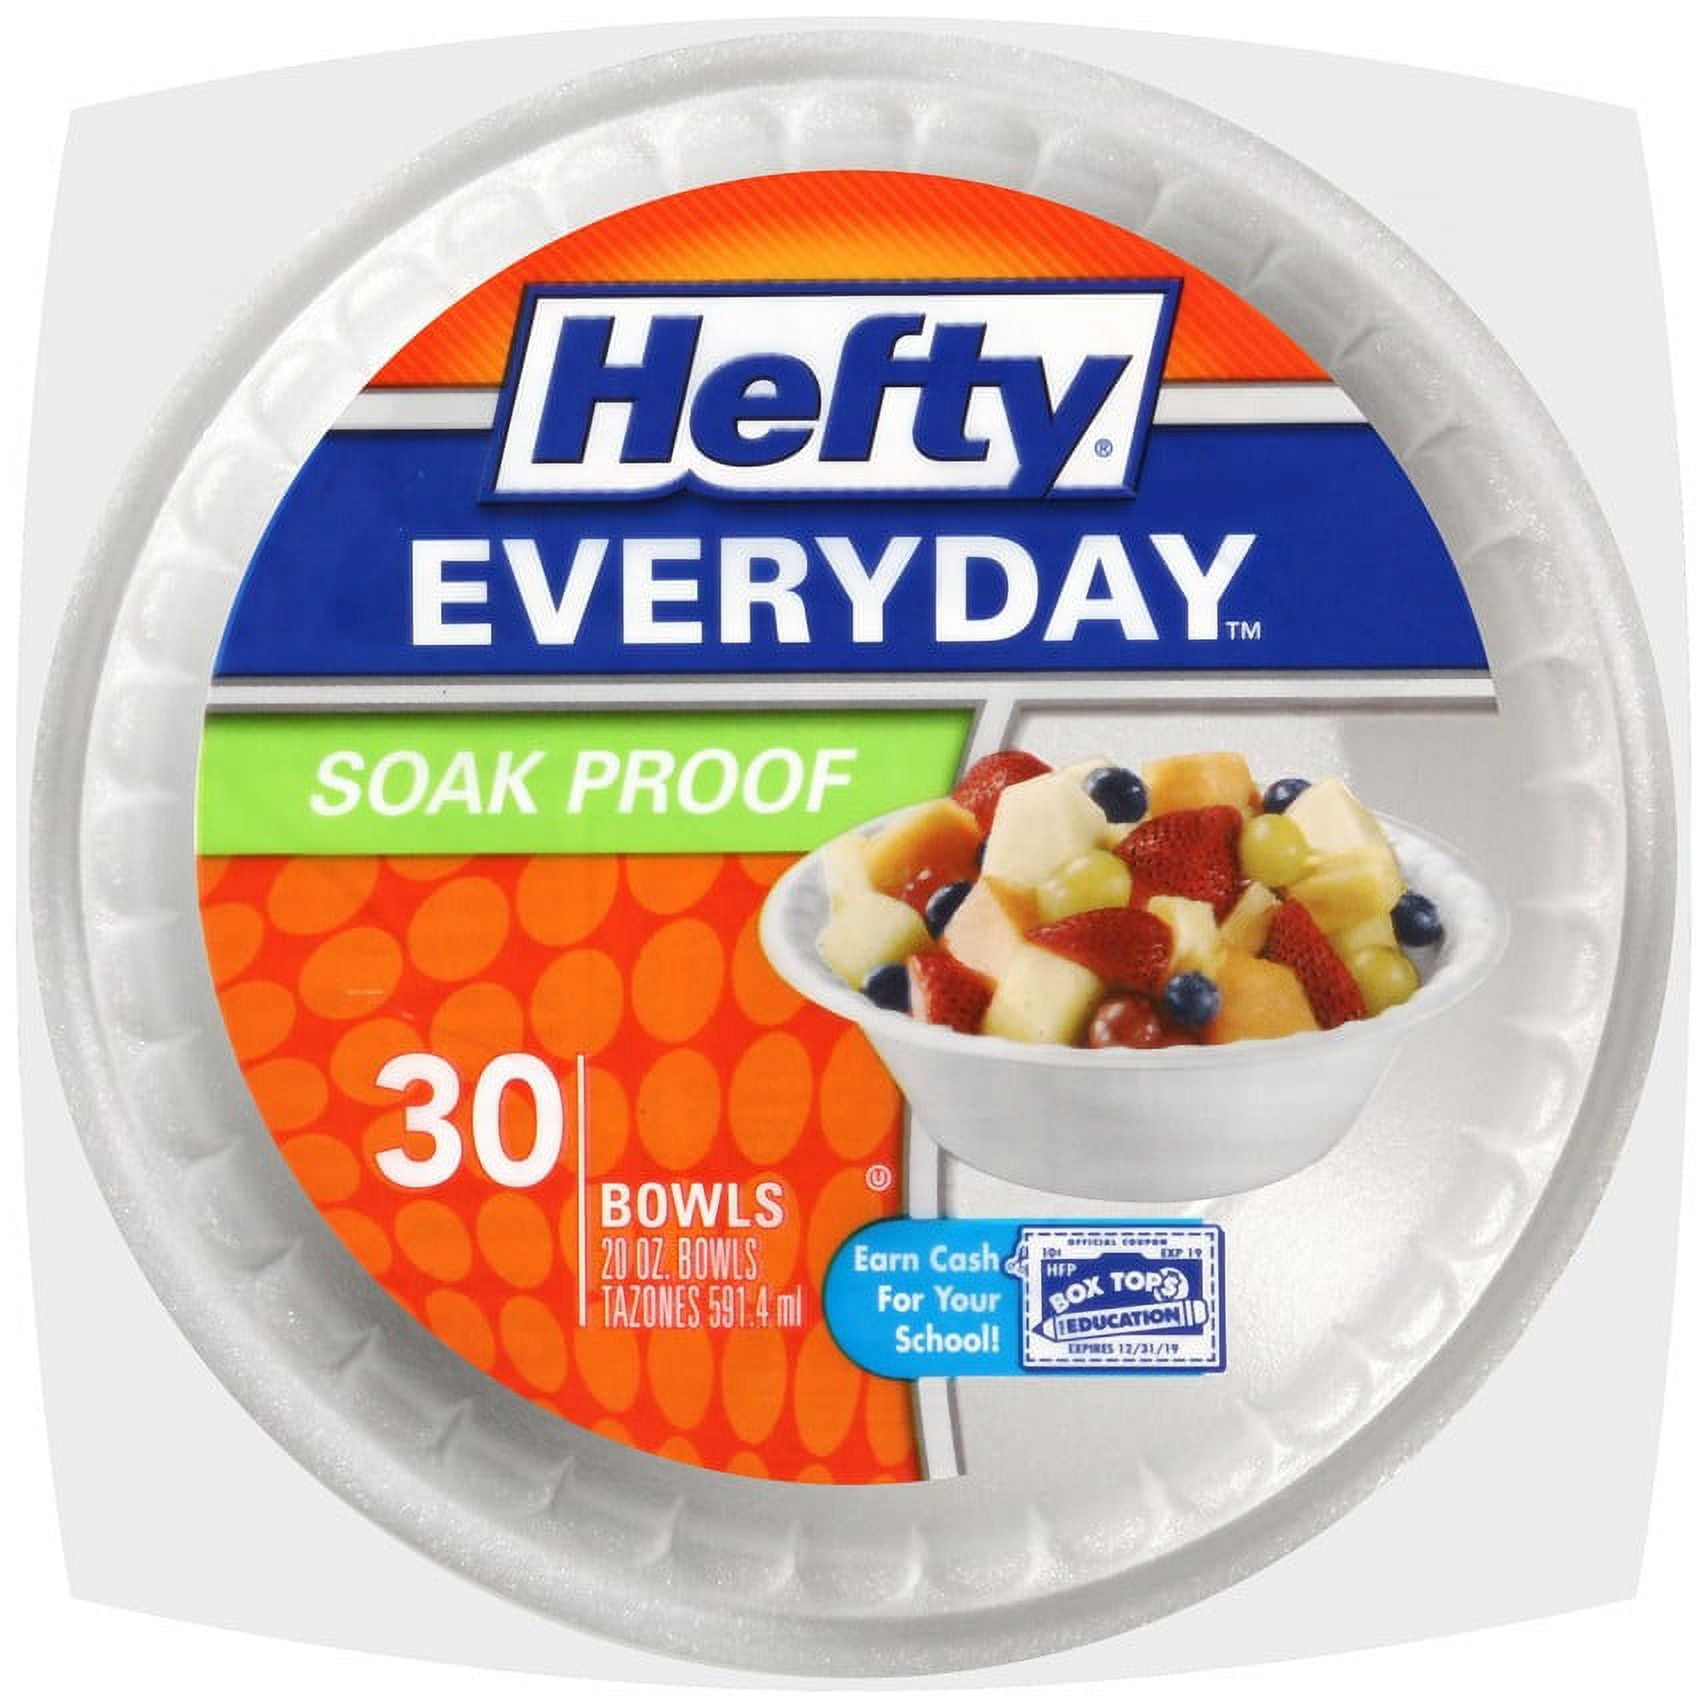 Hefty Everyday Foam Plates (White, Soak Proof, 9, 50 Count, Pack of 8)